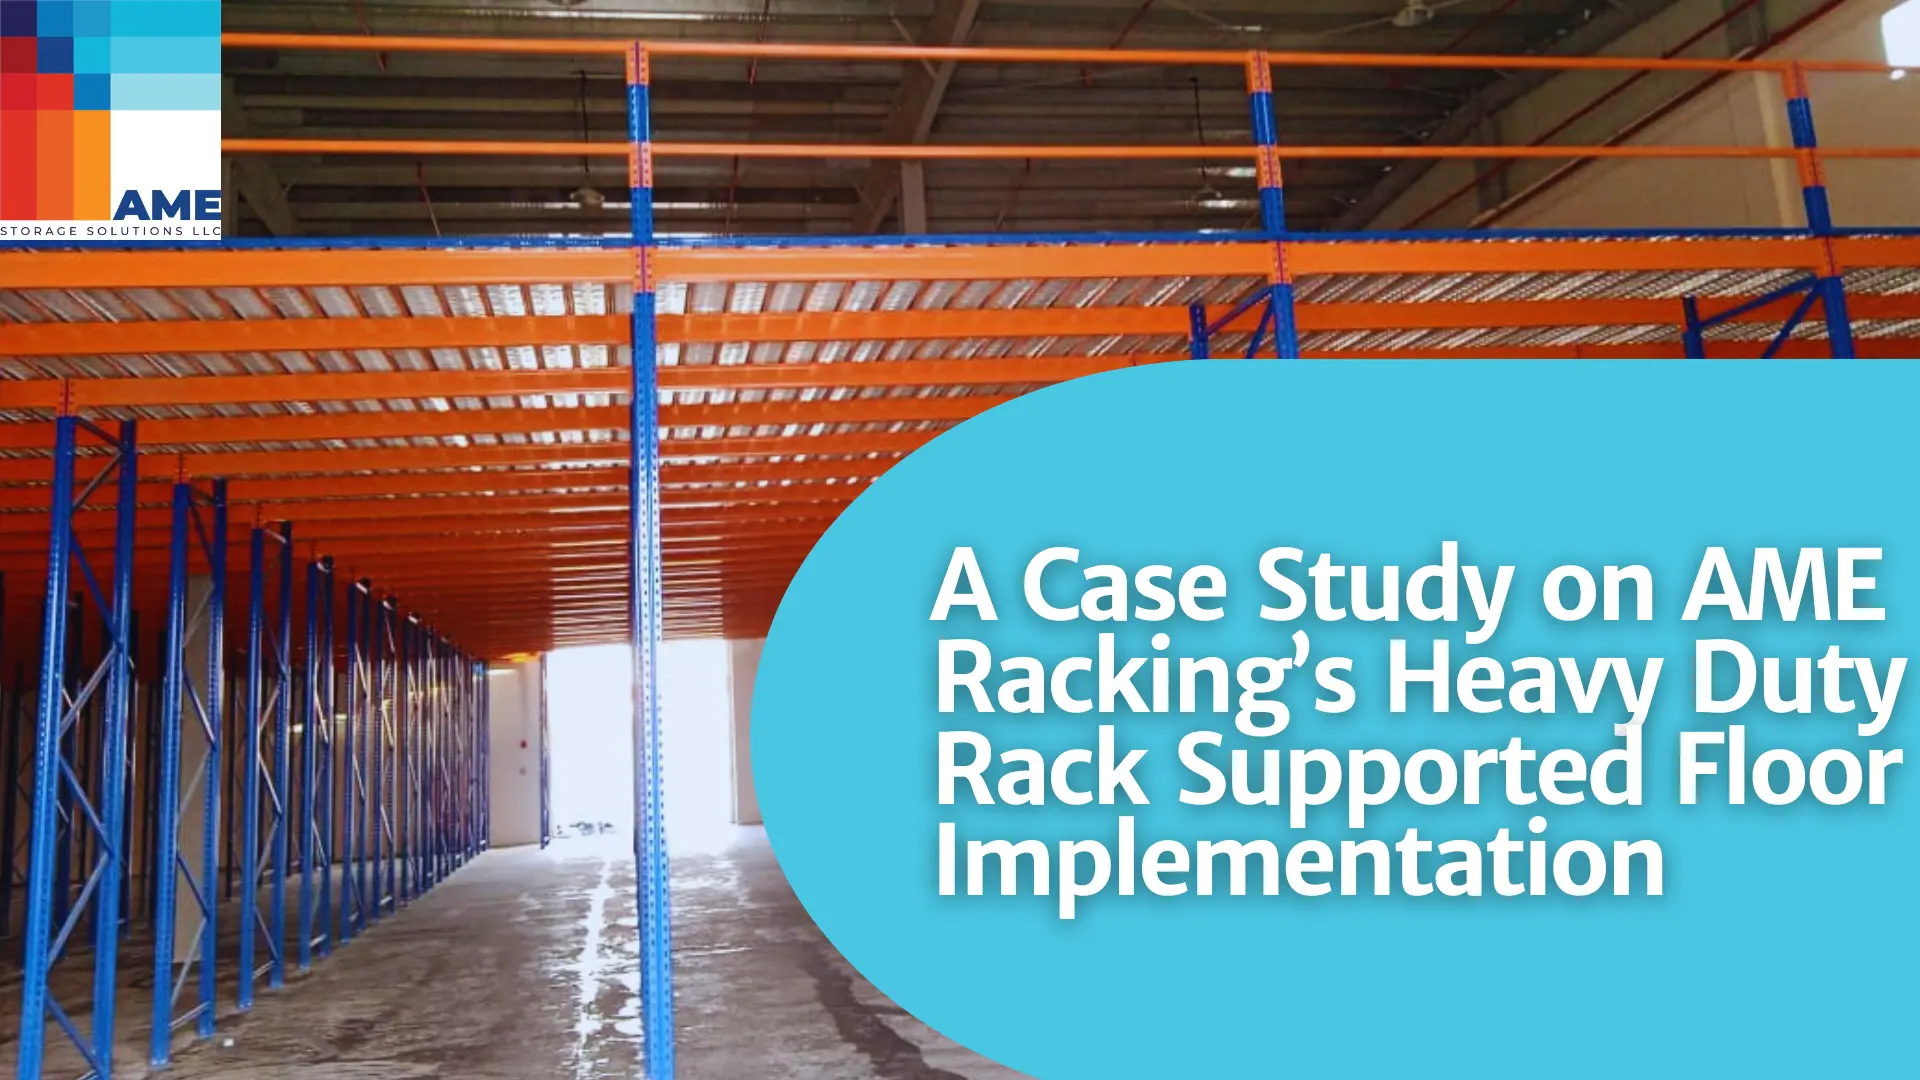 Heavy Duty Rack Supported Floor Implementation by AME- Racking Store in UAE